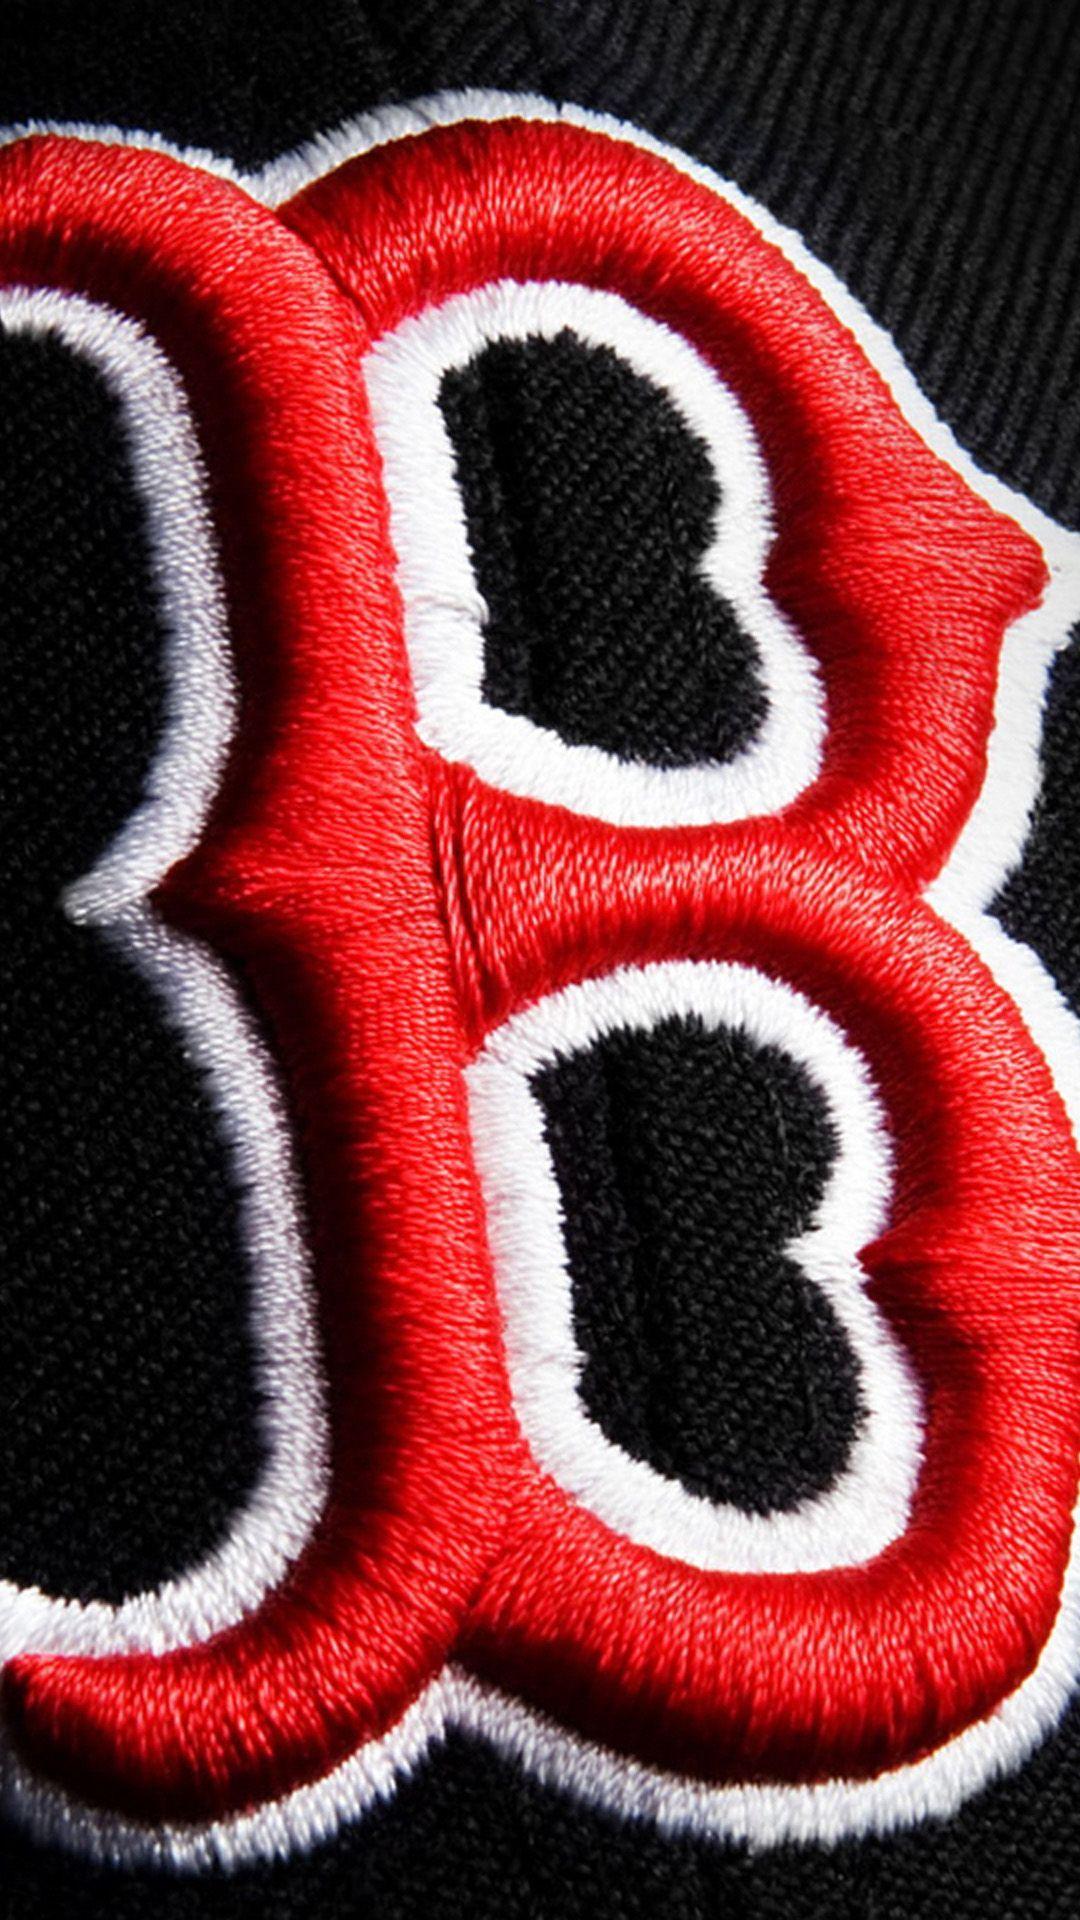 Red sox iphone 5 wallpaper